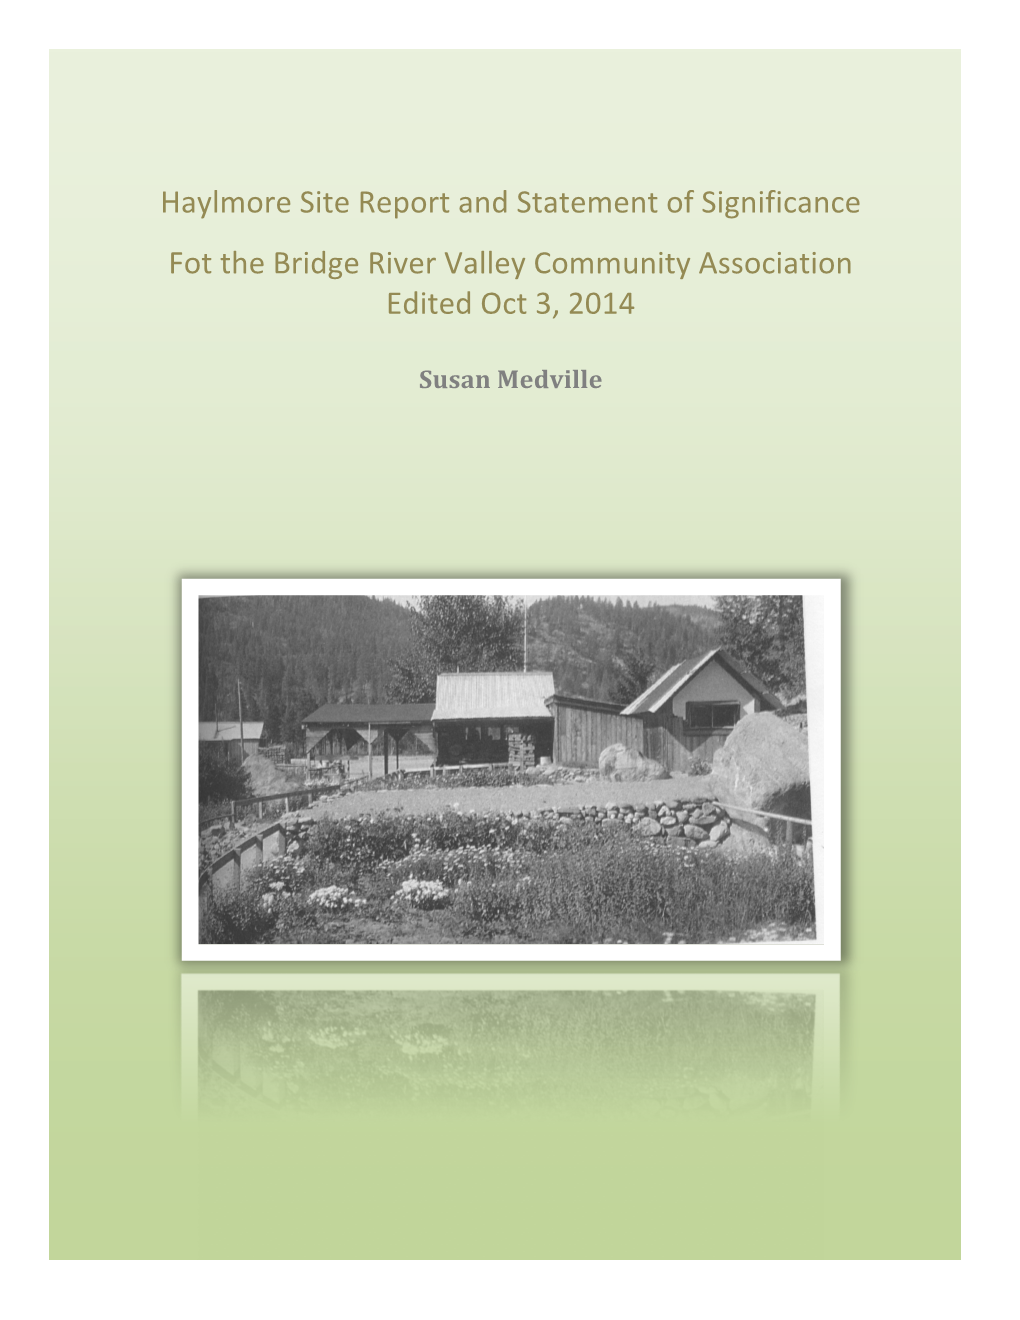 Revised DRAFT Haylmore Site SOS and Report